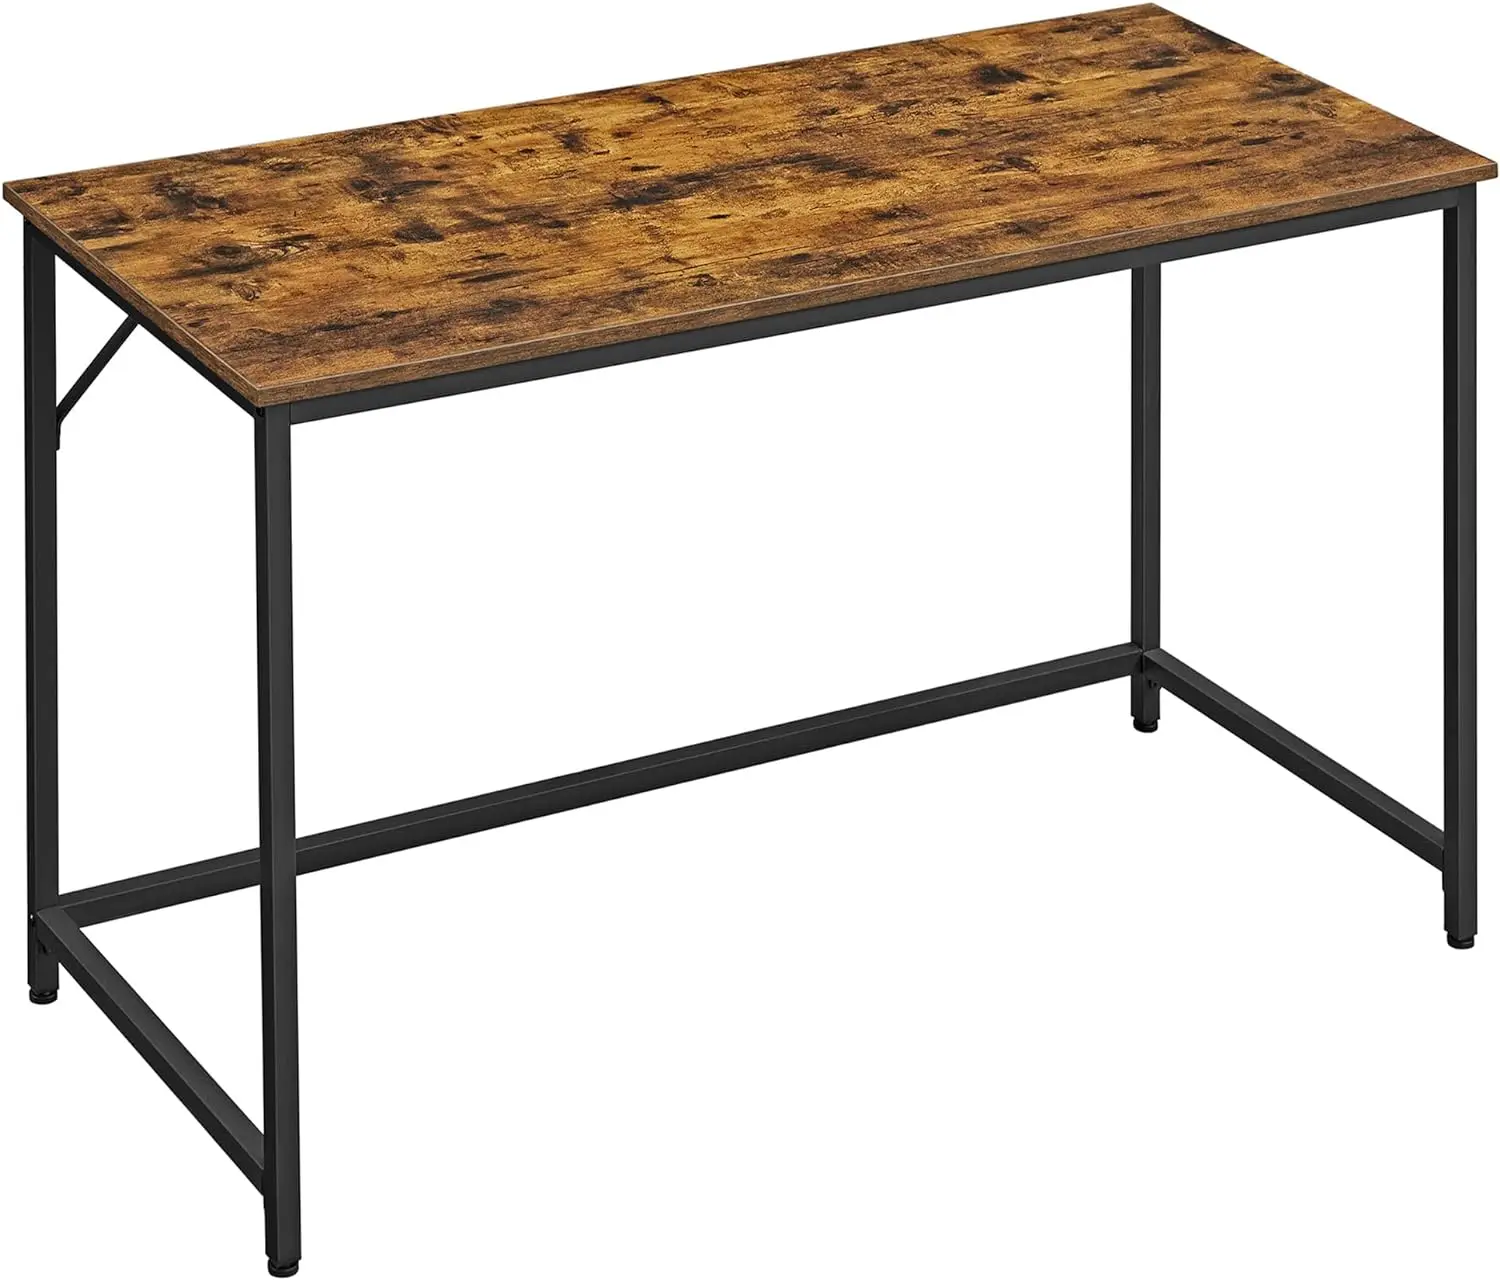 Computer Desk, Gaming Desk, Home Office Desk, for Small Spaces, 23.6 x 47.2 x 29.5 Inches, Industrial Style 17 inches industrial screen sva170sx01tb warranty for 1 year sva170sx01tb